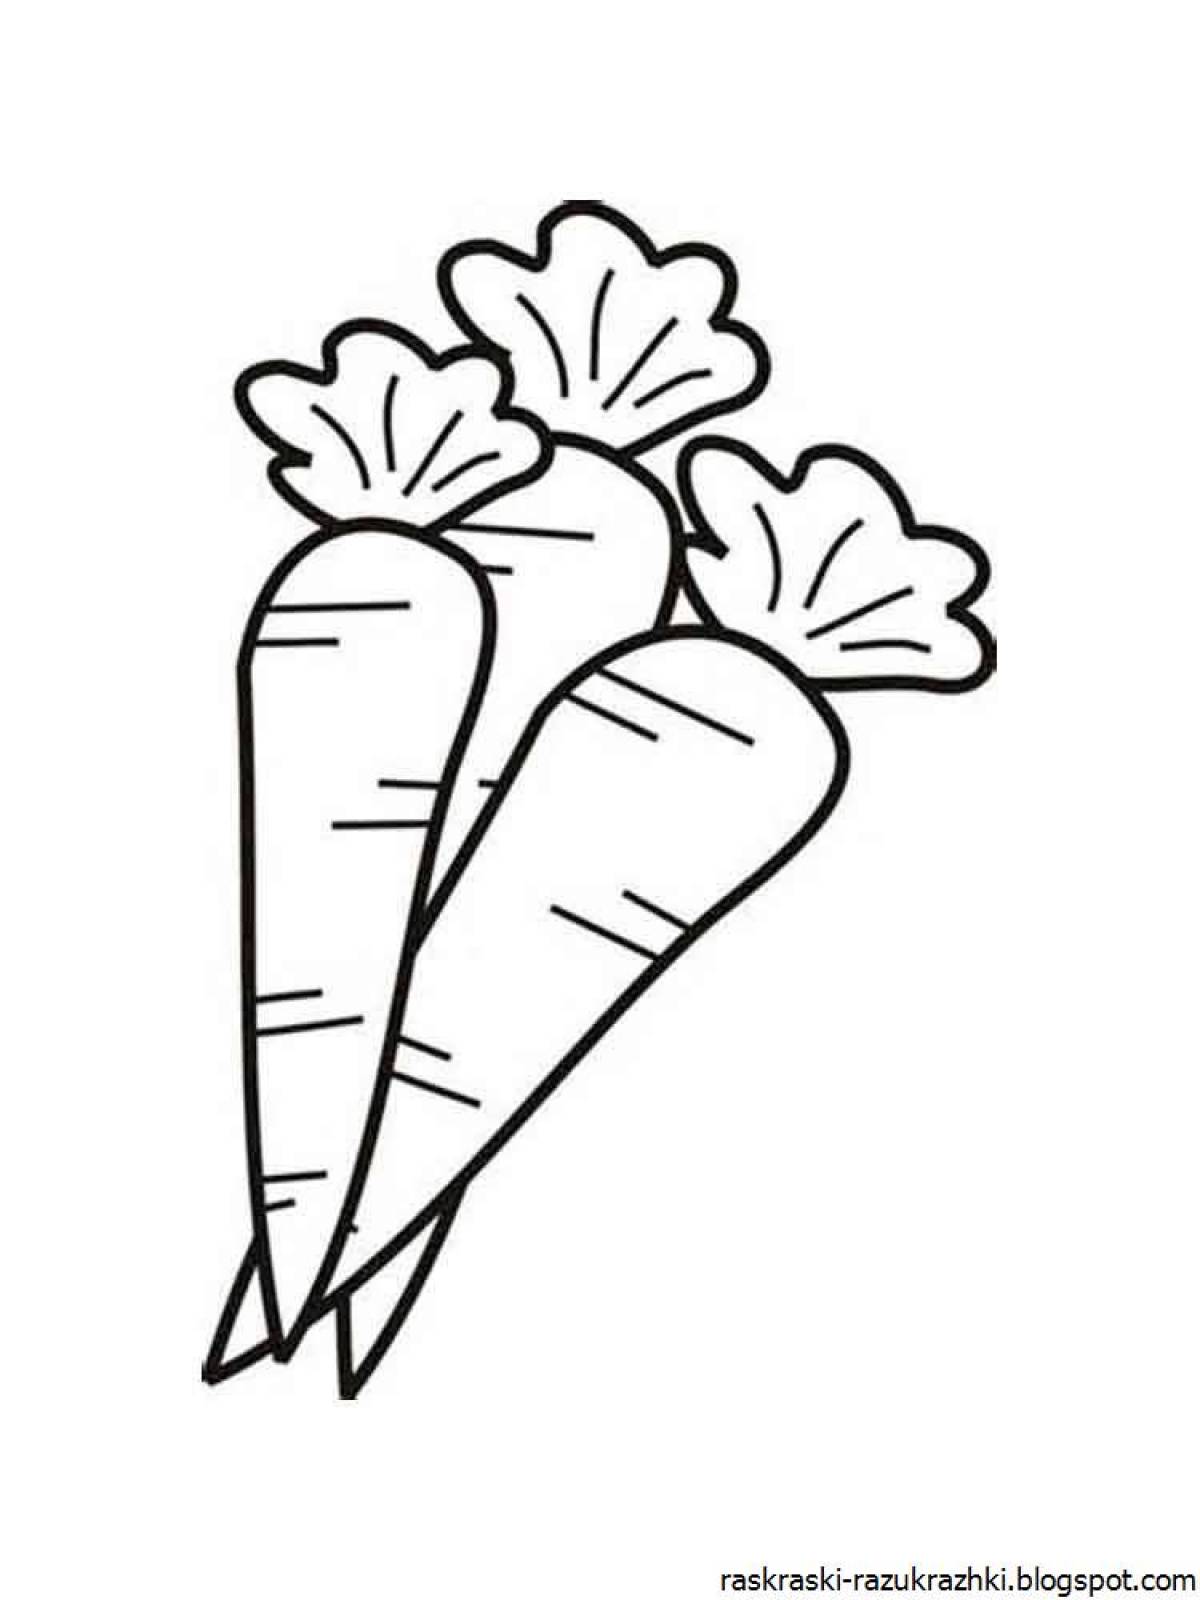 Fabulous carrot coloring book for kids